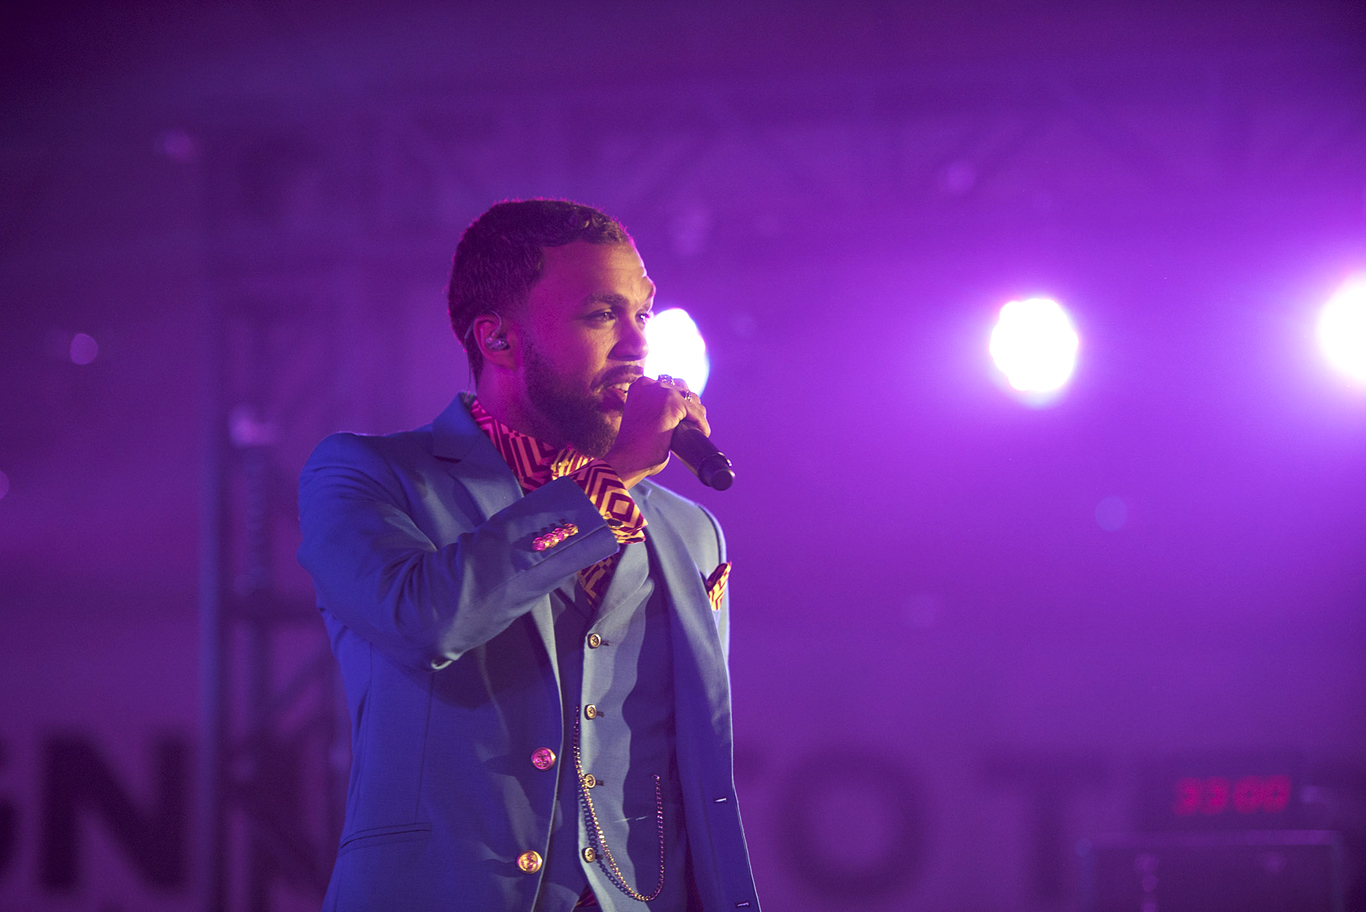 jidenna perfoming at Essence Festical